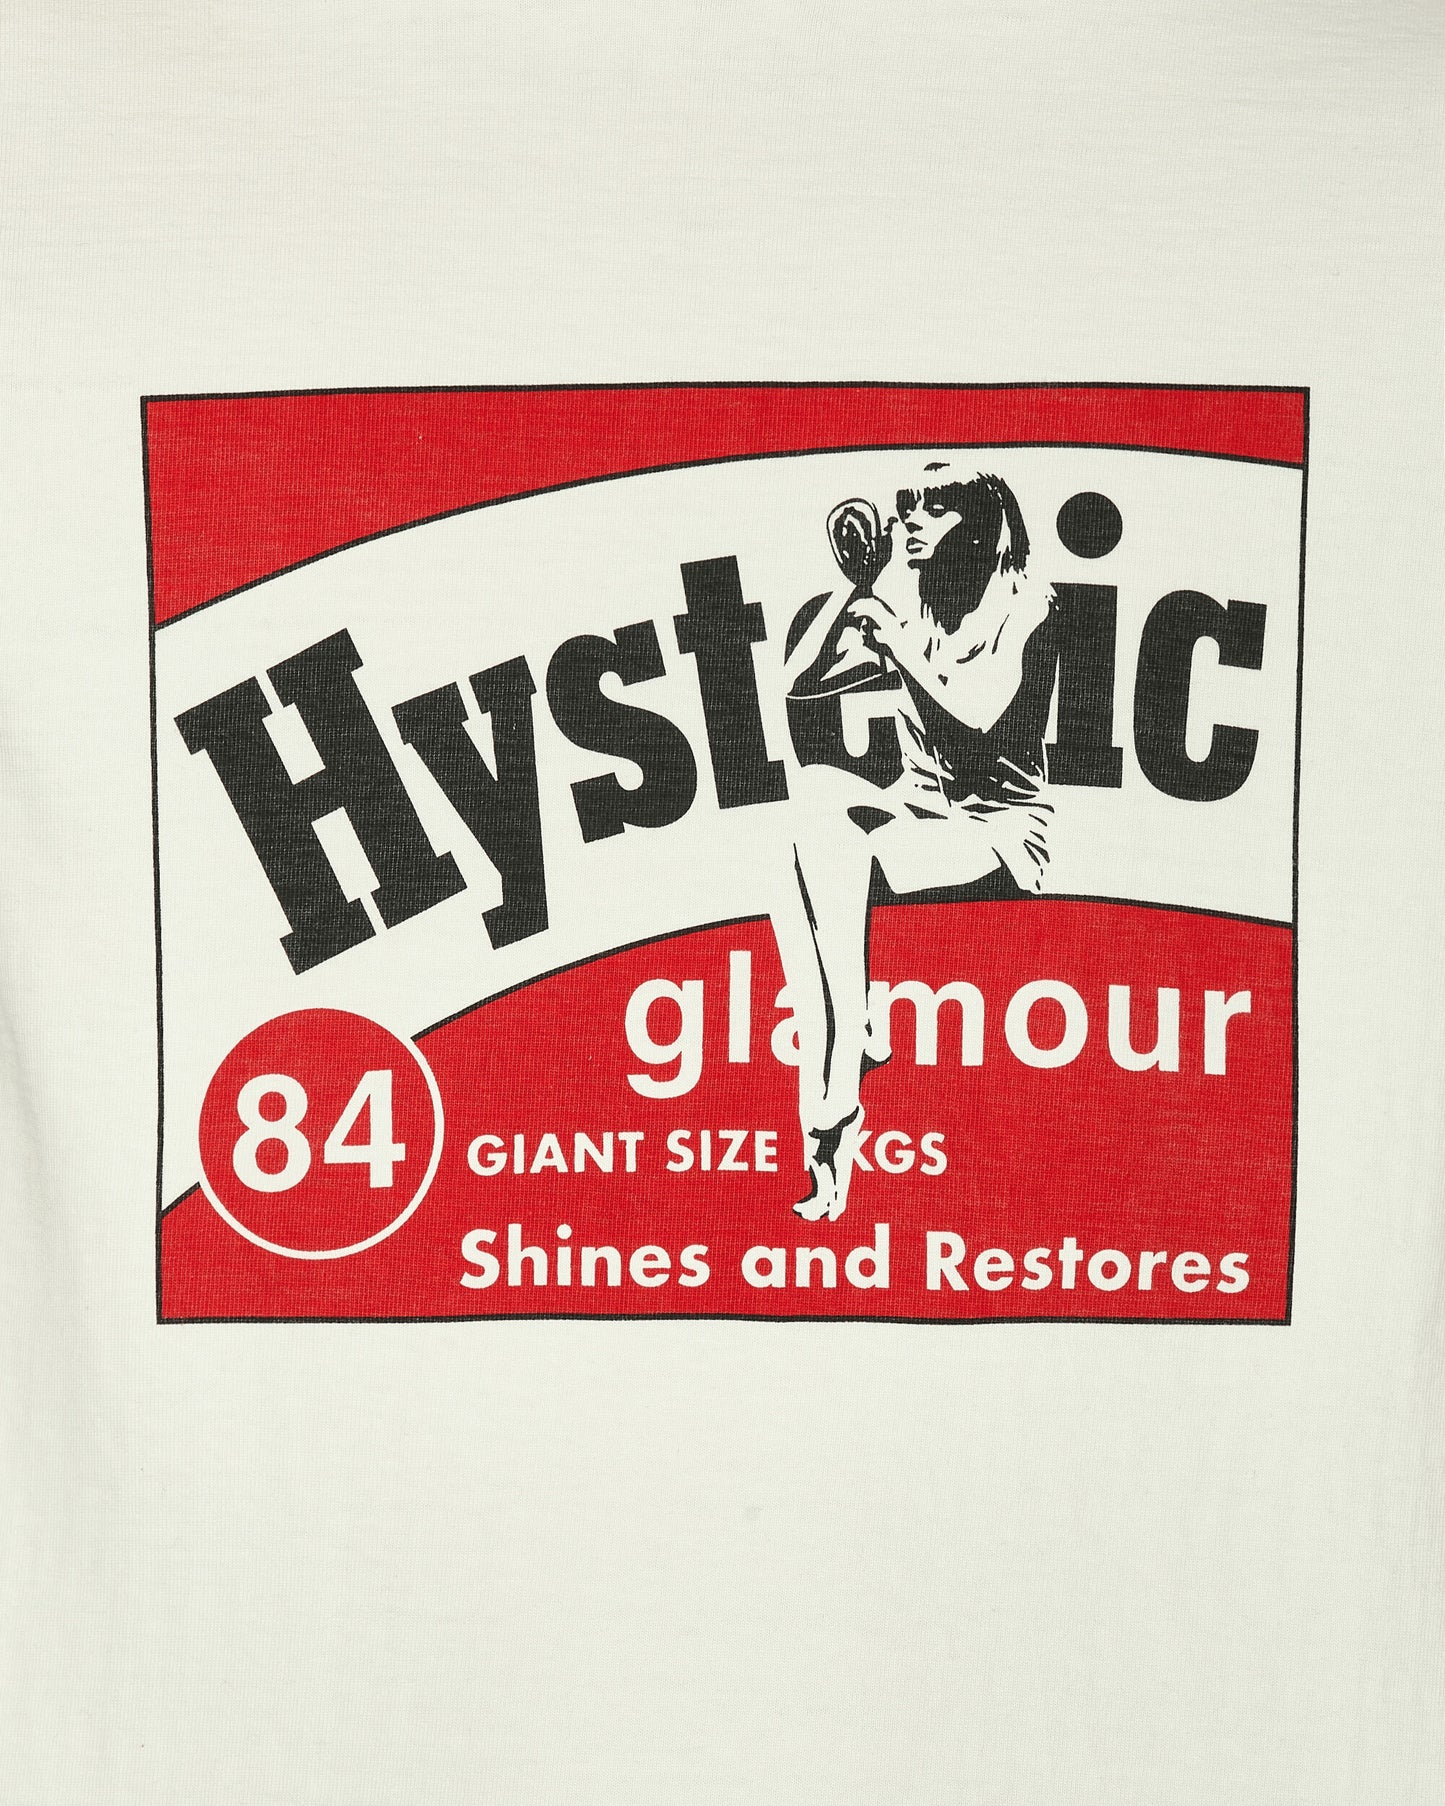 Hysteric Glamour Hg Polish Dirty White T-Shirts Shortsleeve 02241CT02 A